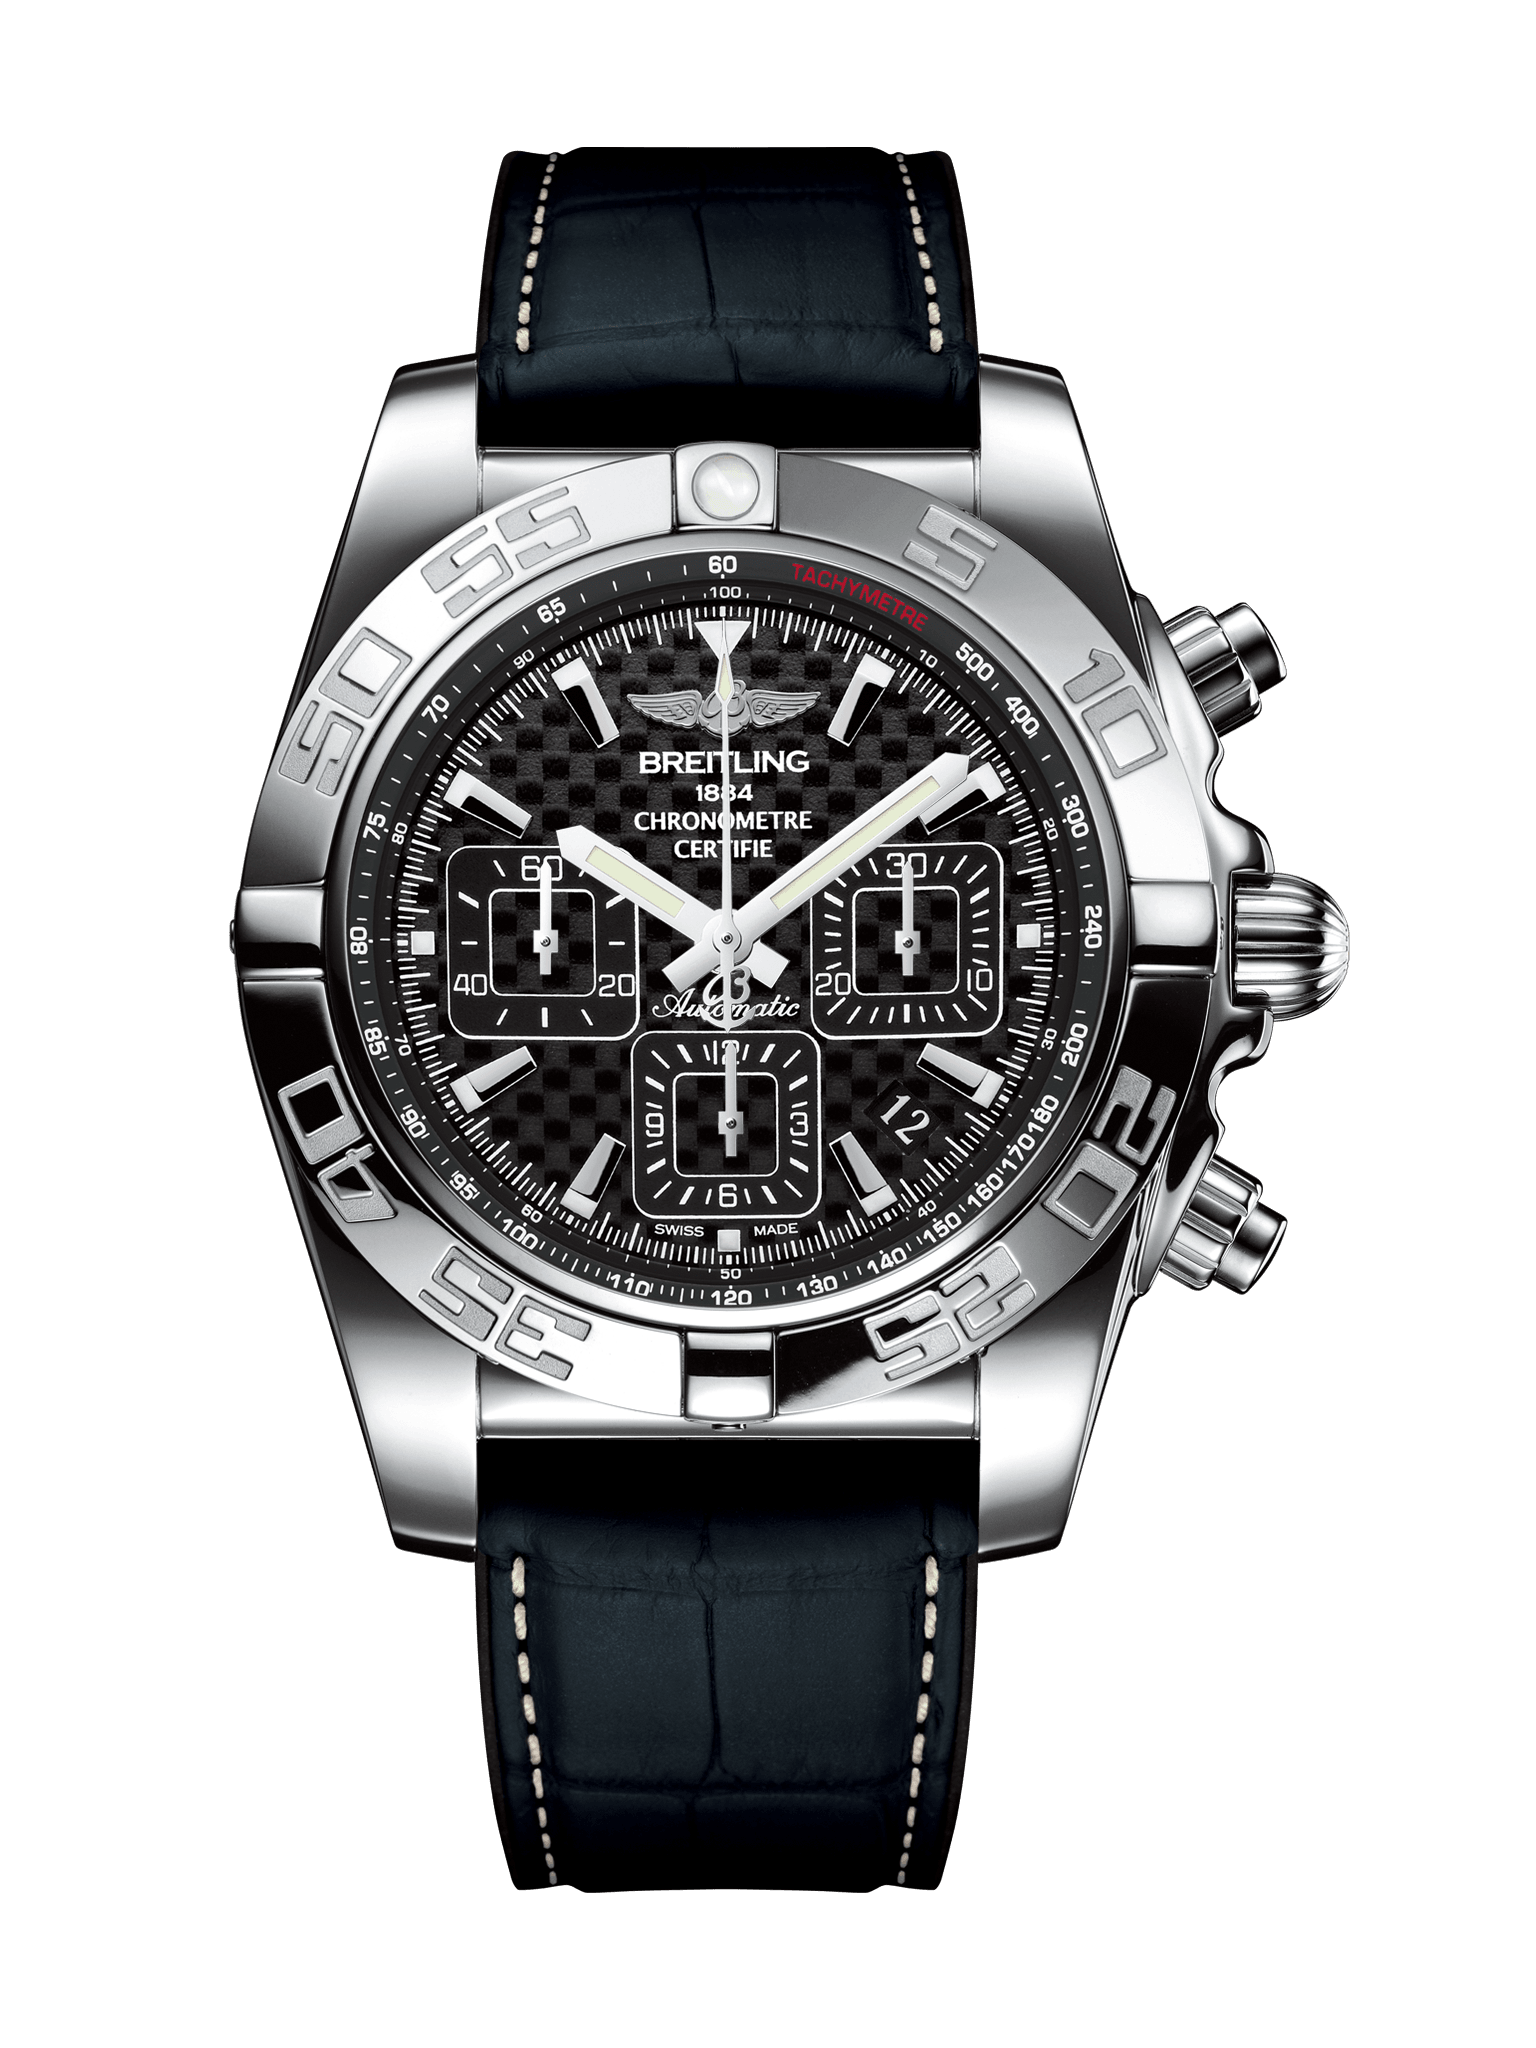 {breitling}Brettlin Good Products (Brettlin) breitling Bentley GT Special Edition A13362 Auto Winding Men sev10 s.10 s.s.a.